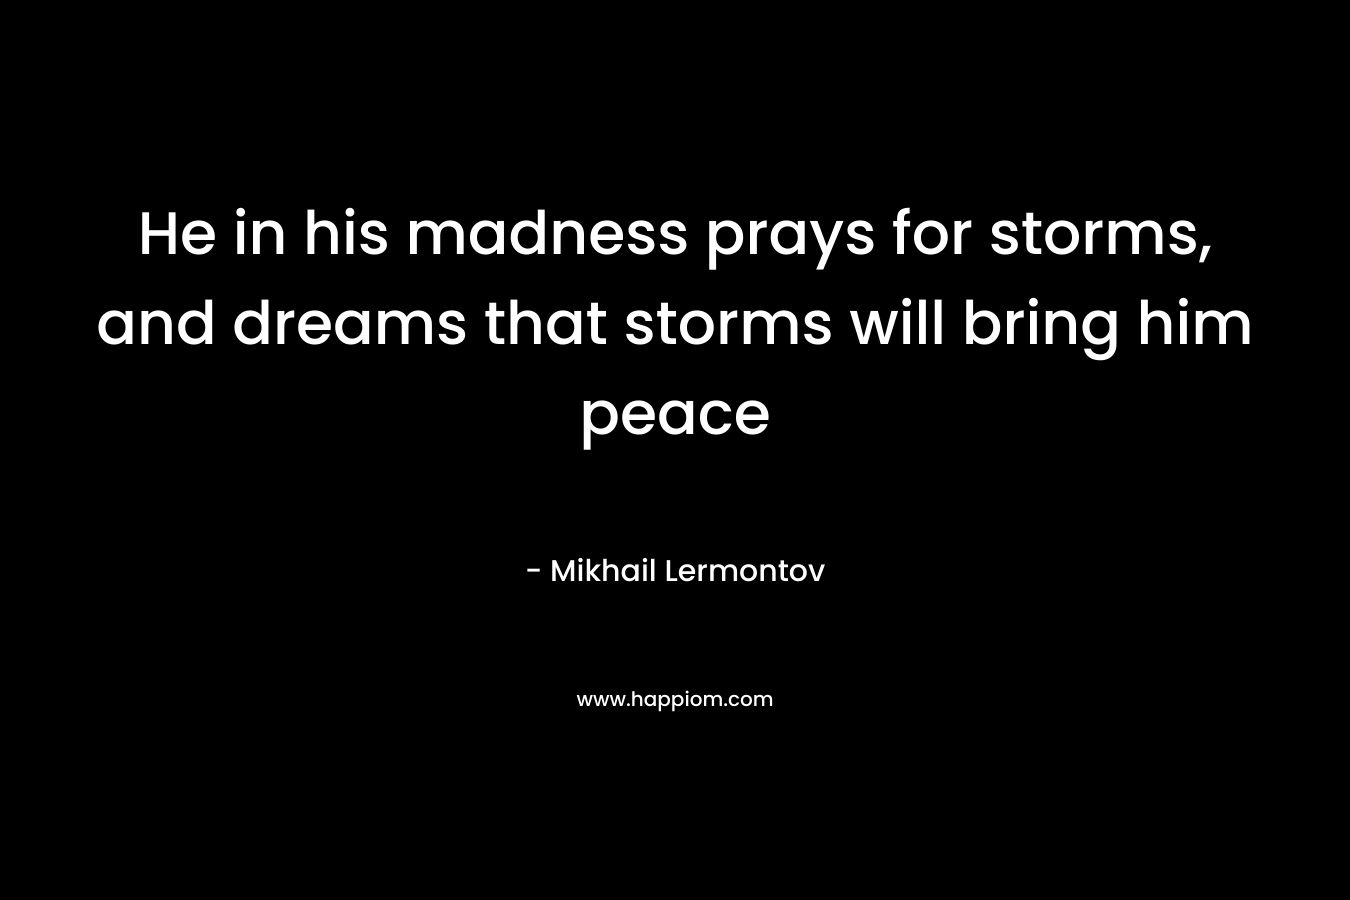 He in his madness prays for storms, and dreams that storms will bring him peace – Mikhail Lermontov